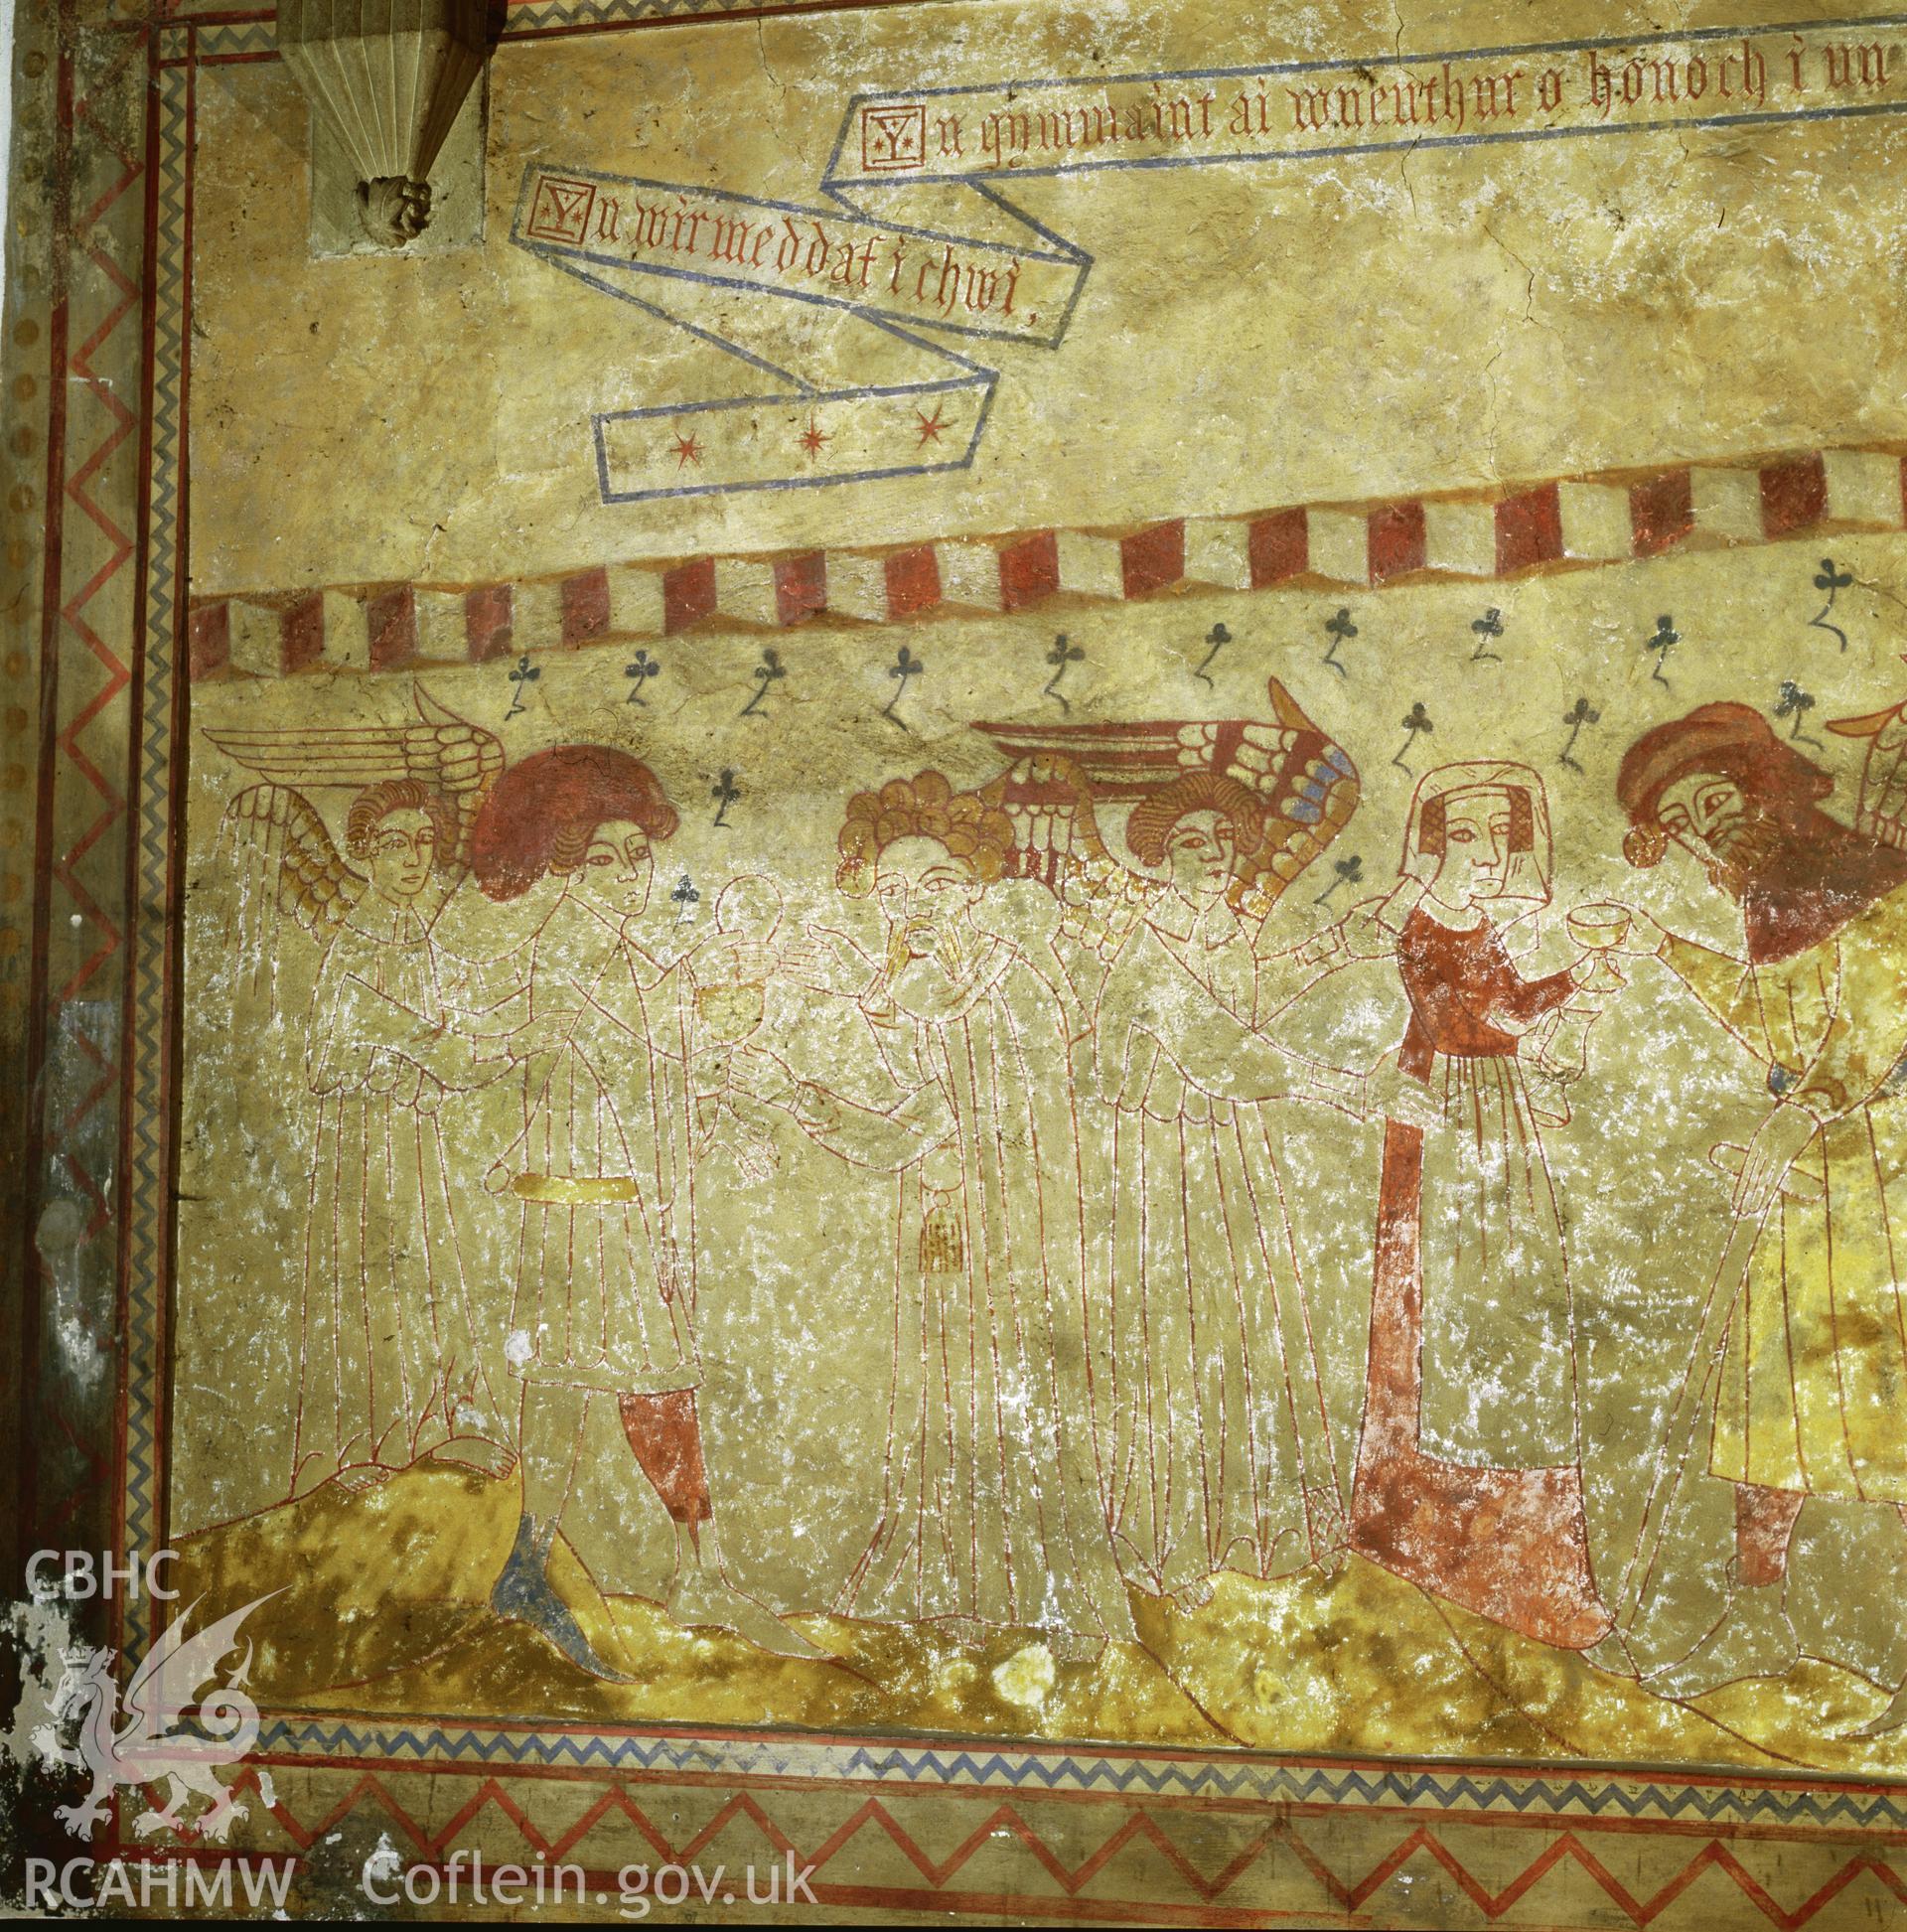 RCAHMW colour transparency showing a wall painting at Ruabon Church, taken by I.N. Wright, 2003